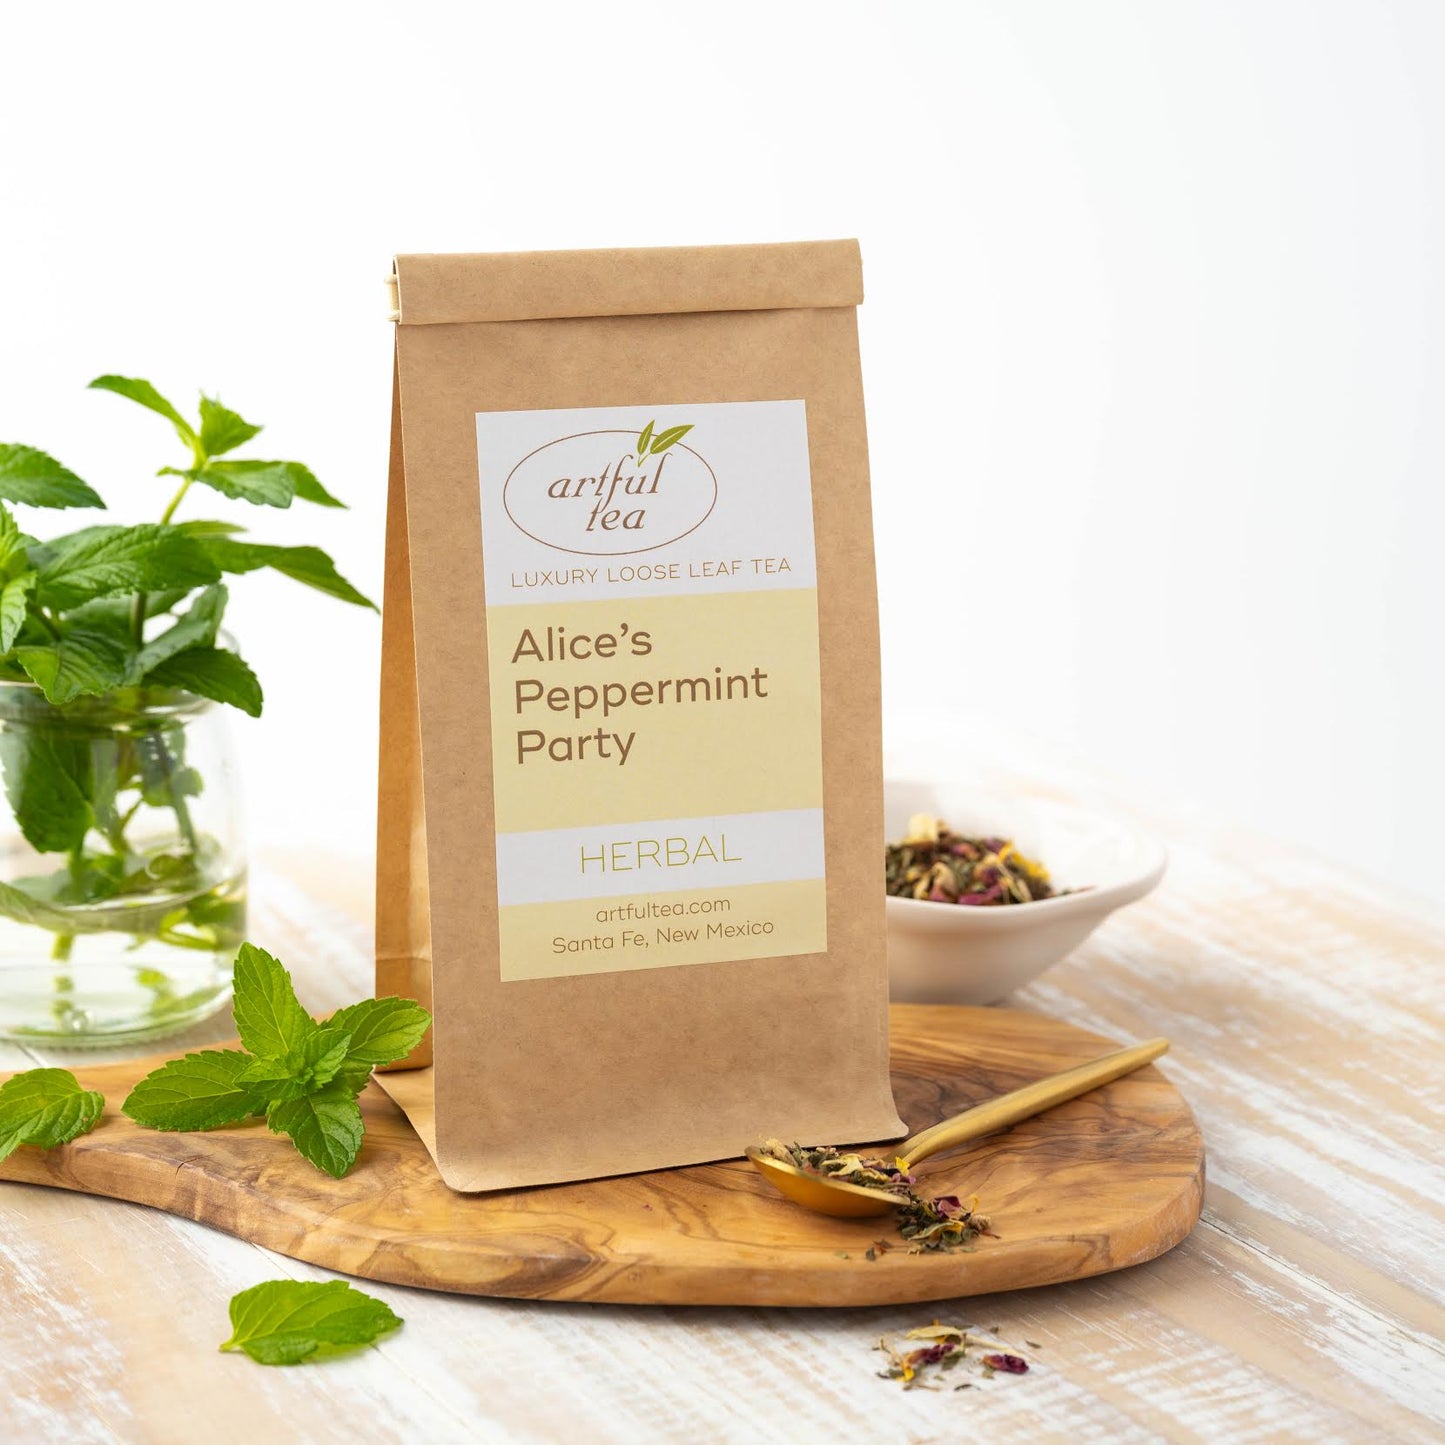 Alice's Peppermint Party Herbal Tea